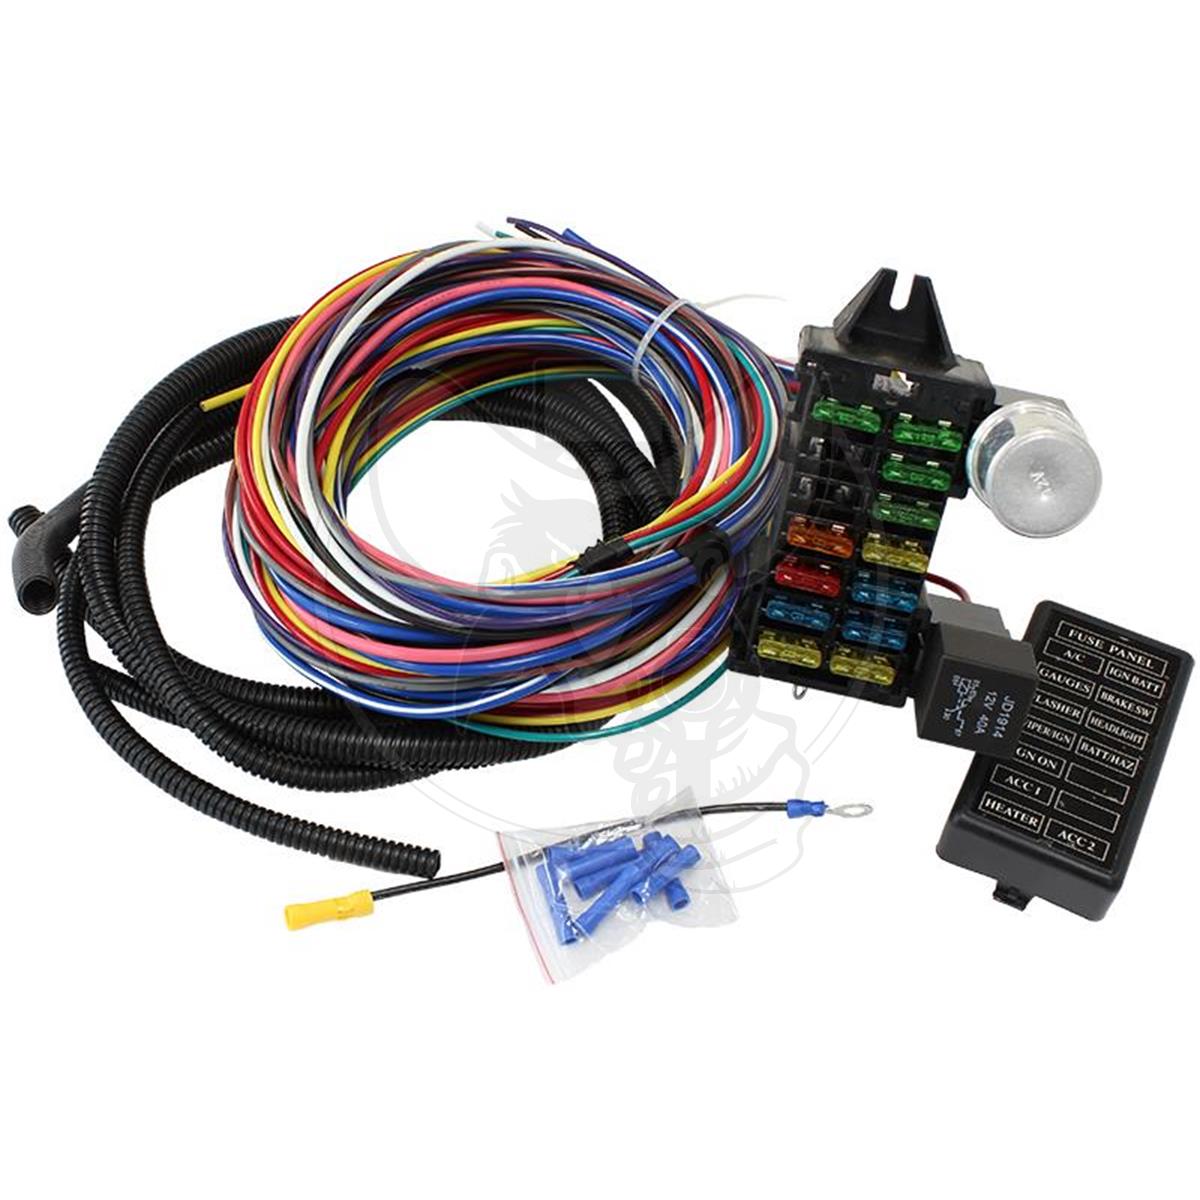 AEROFLOW COMPLETE WIRING HARNESS KIT 12-CCT W/STD FUSES & FUSE PANEL